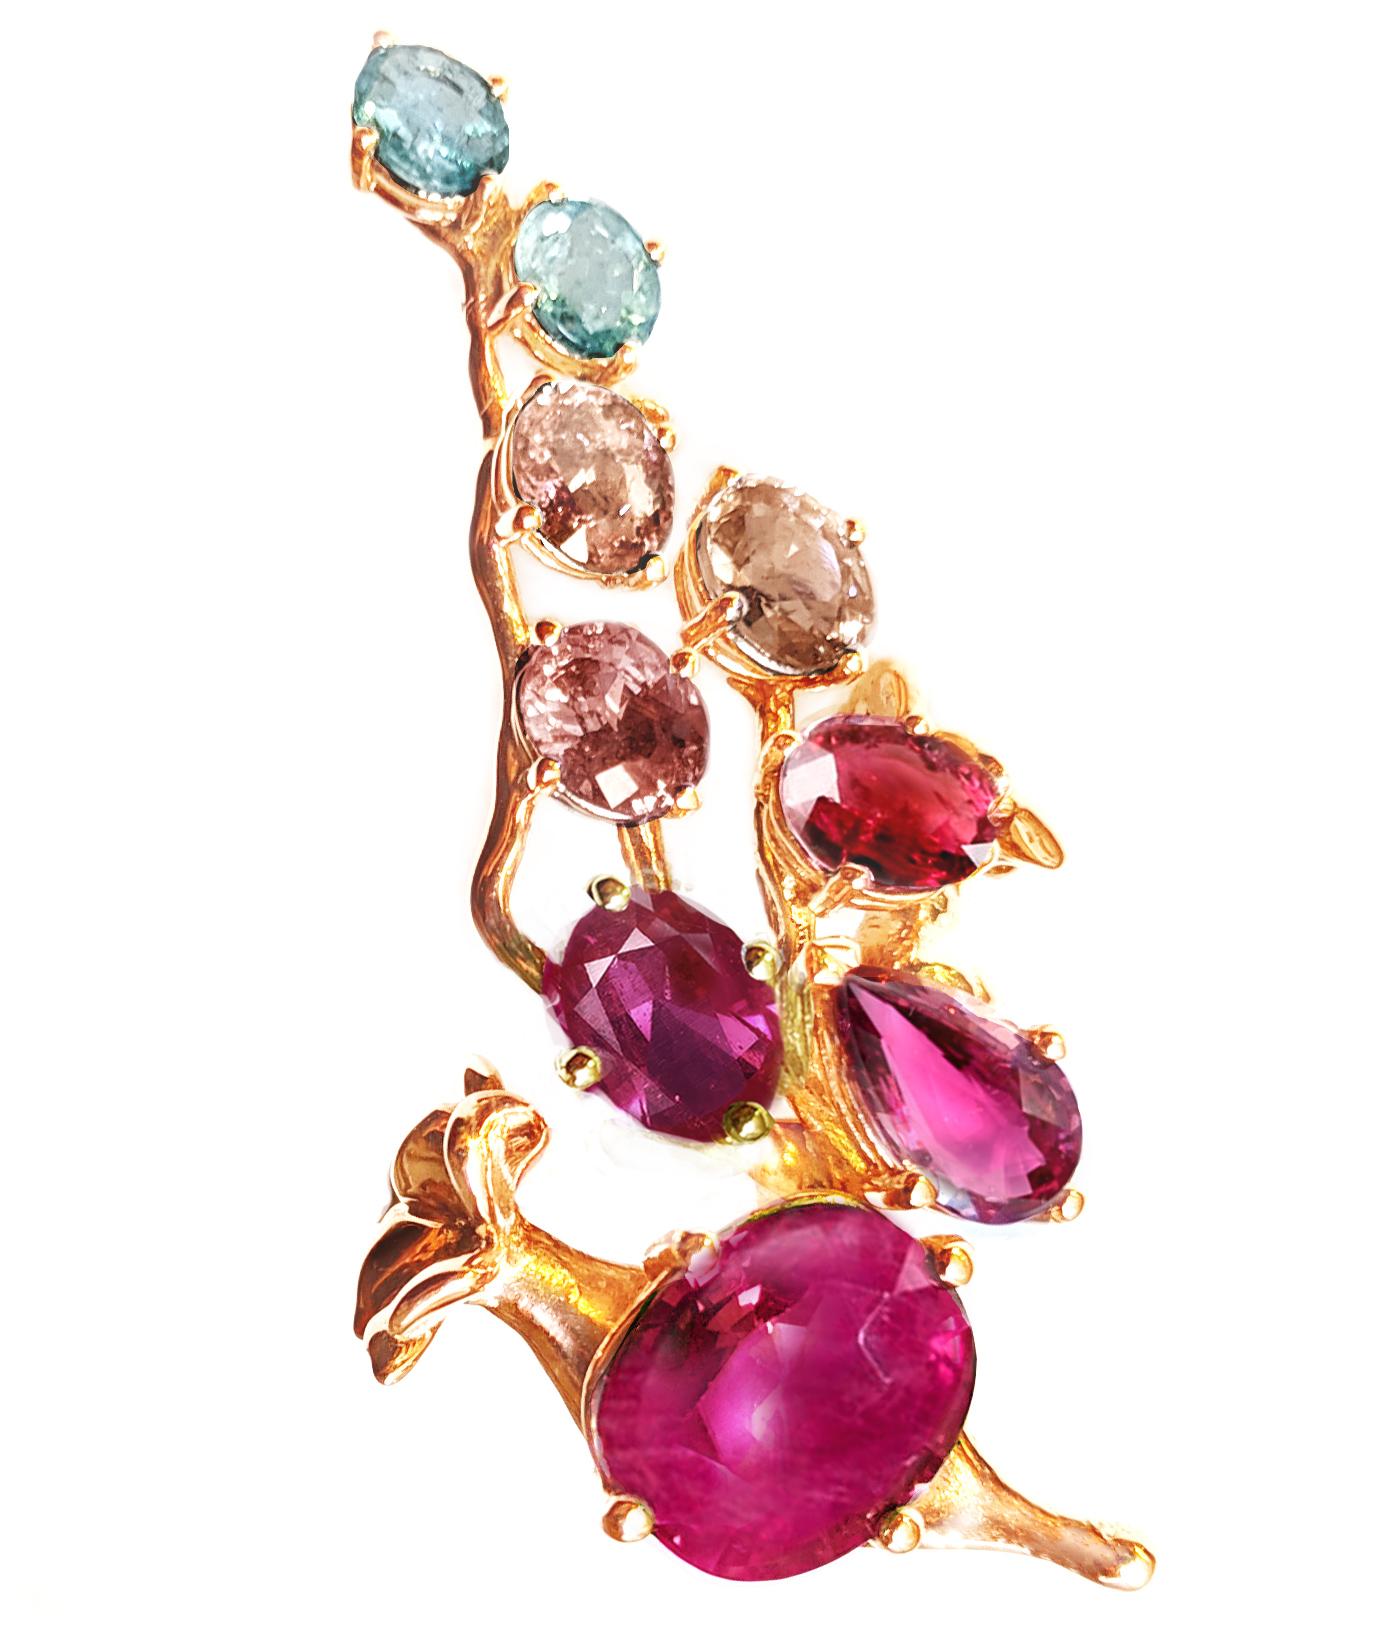 18 Karat Rose Gold Contemporary Rubies Brooch with Rubellite and Malaya Garnet For Sale 3